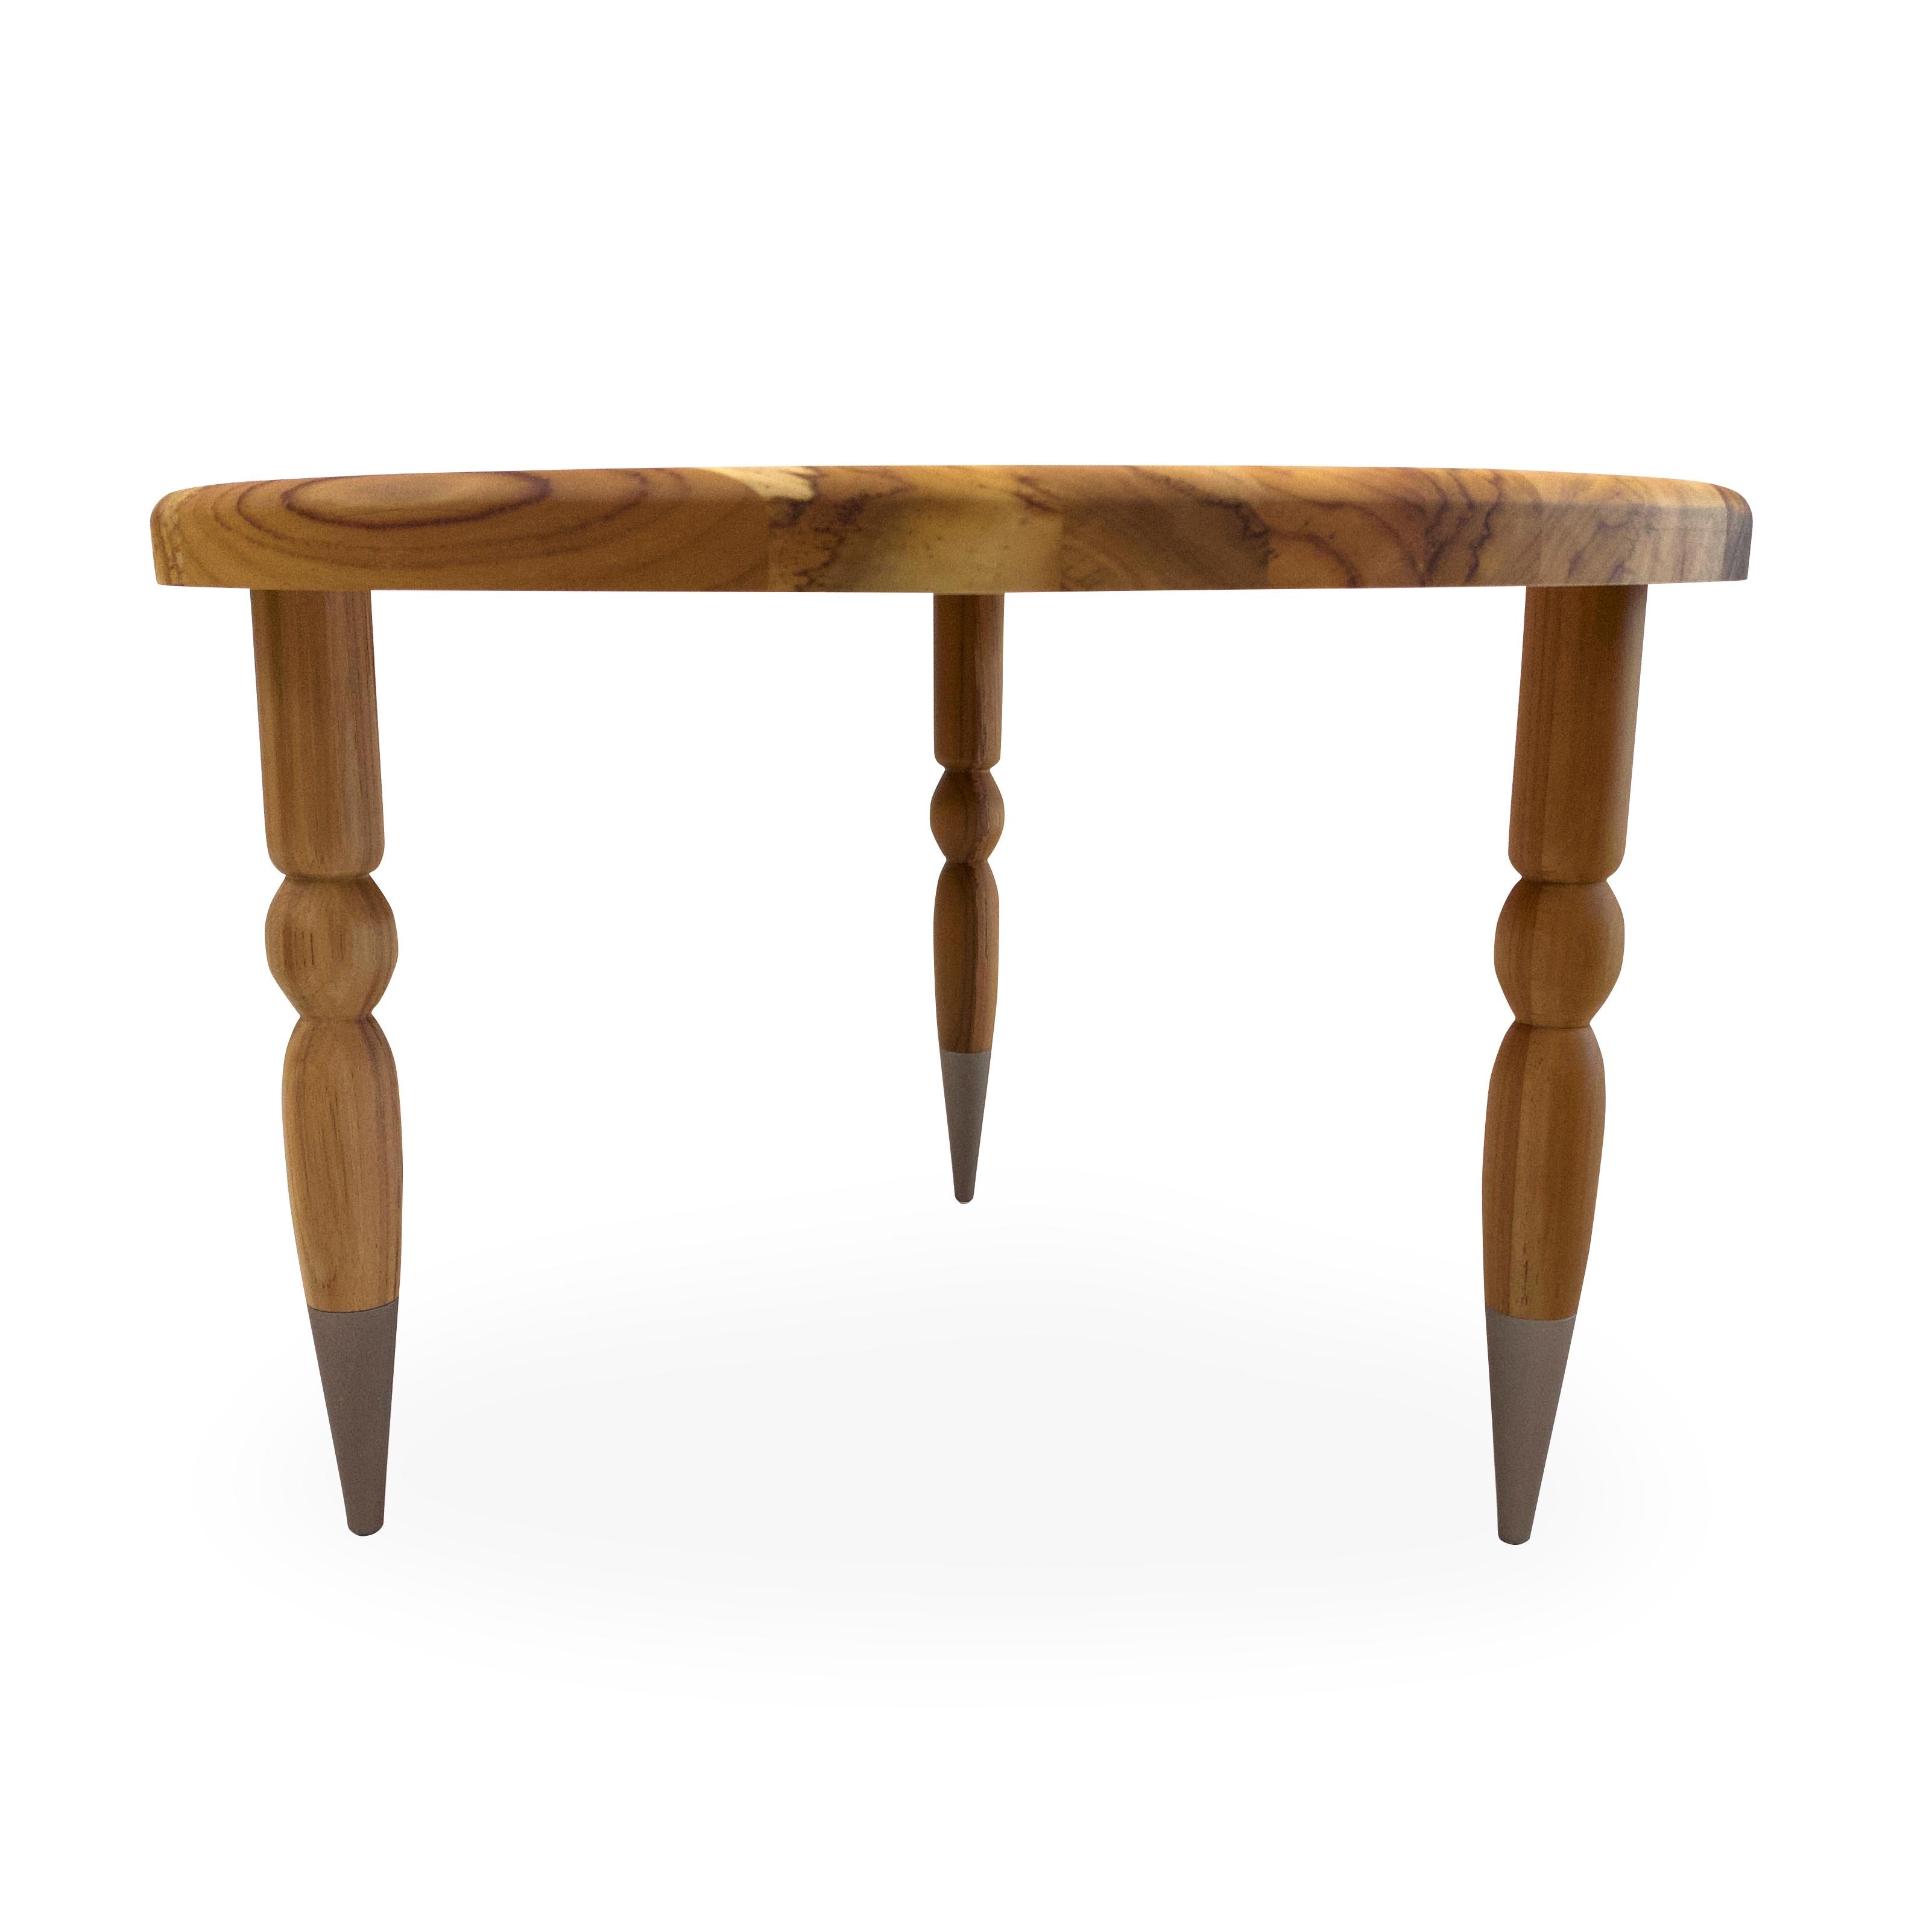 Palo Side Table in Teak Wood with Chocolate Turned Spindle Legs, Set of 3 For Sale 2